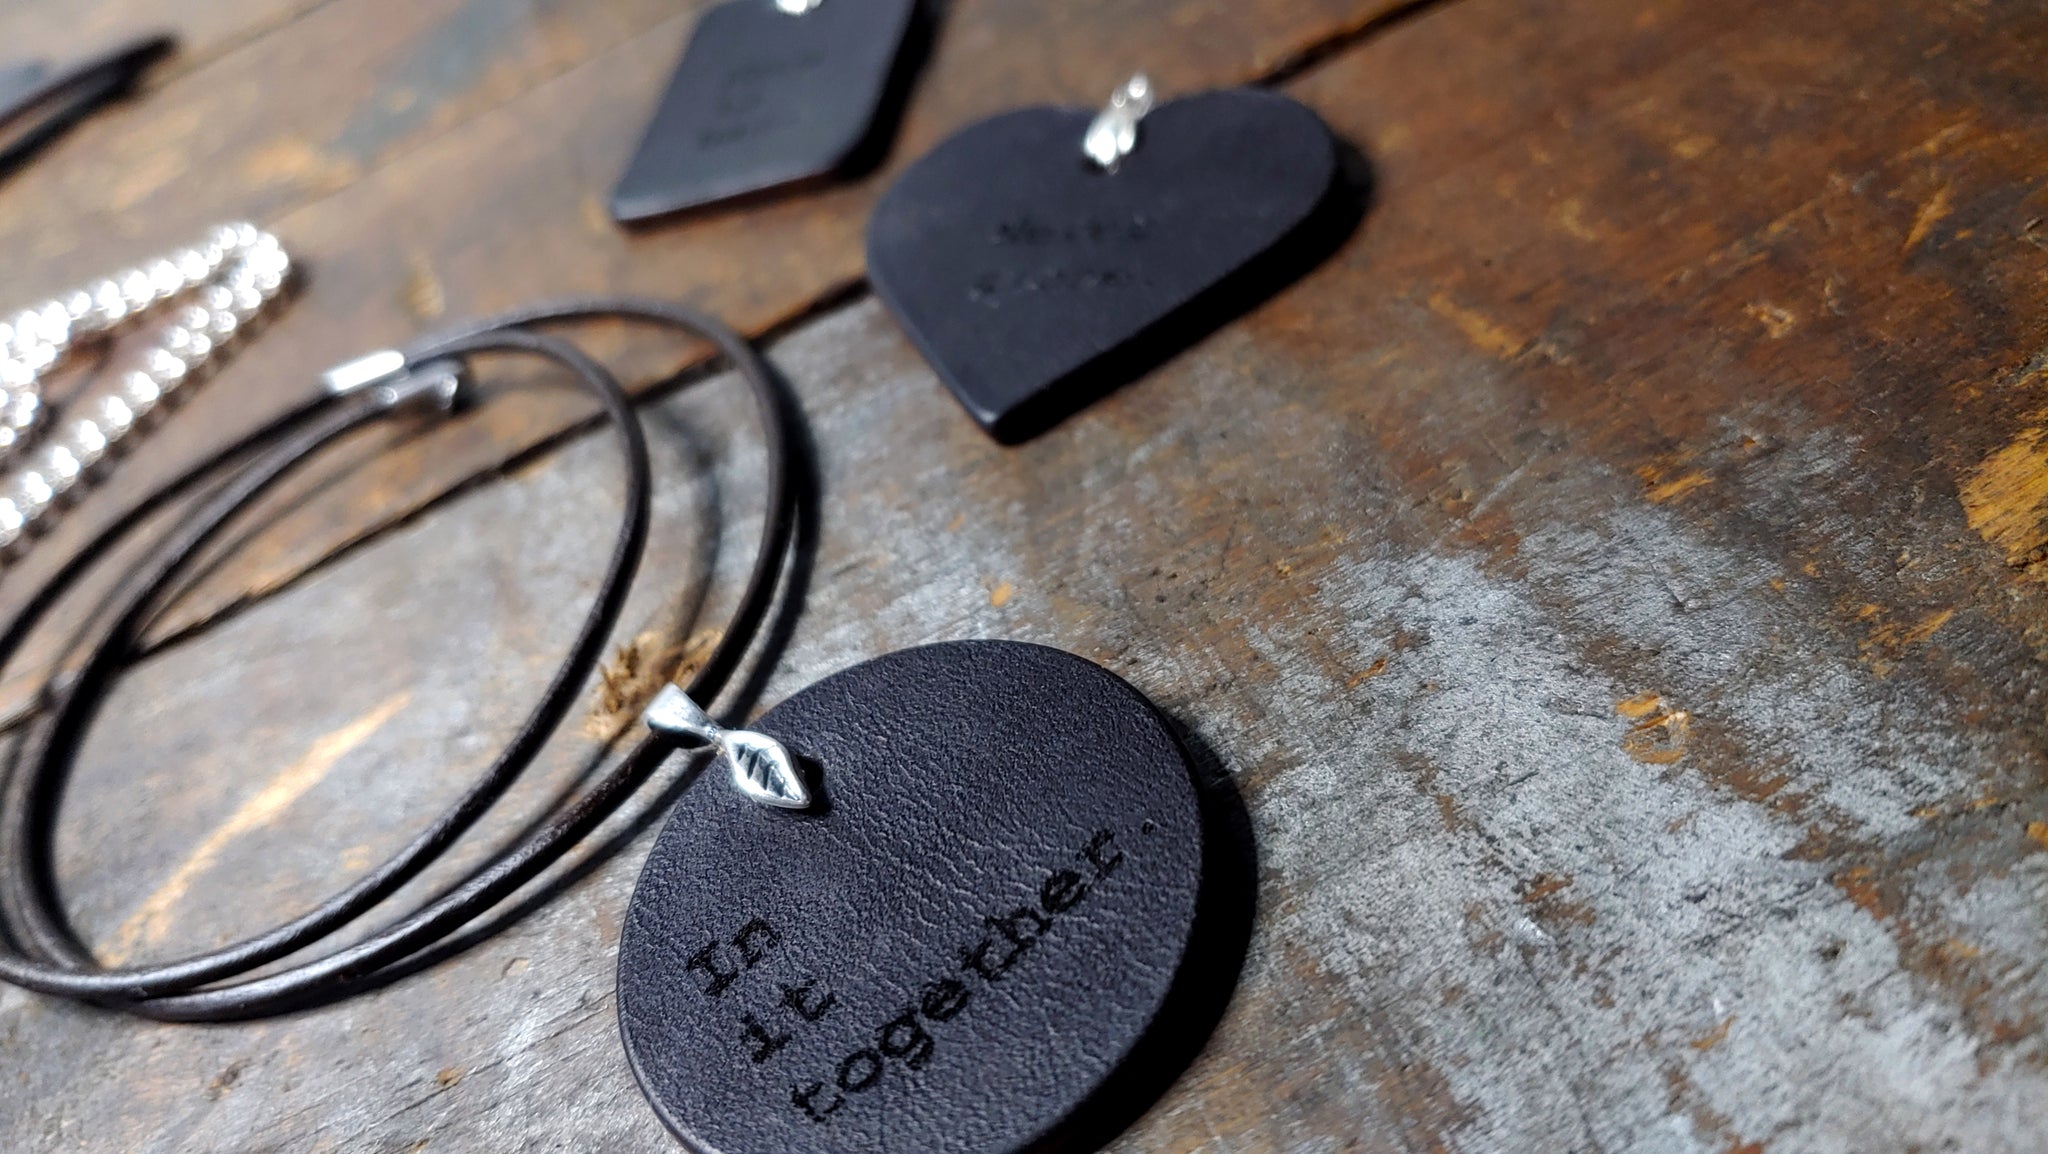 The Compassion Genuine Leather Necklace with Sterling Silver Leaf Bail & Lobster Clasp